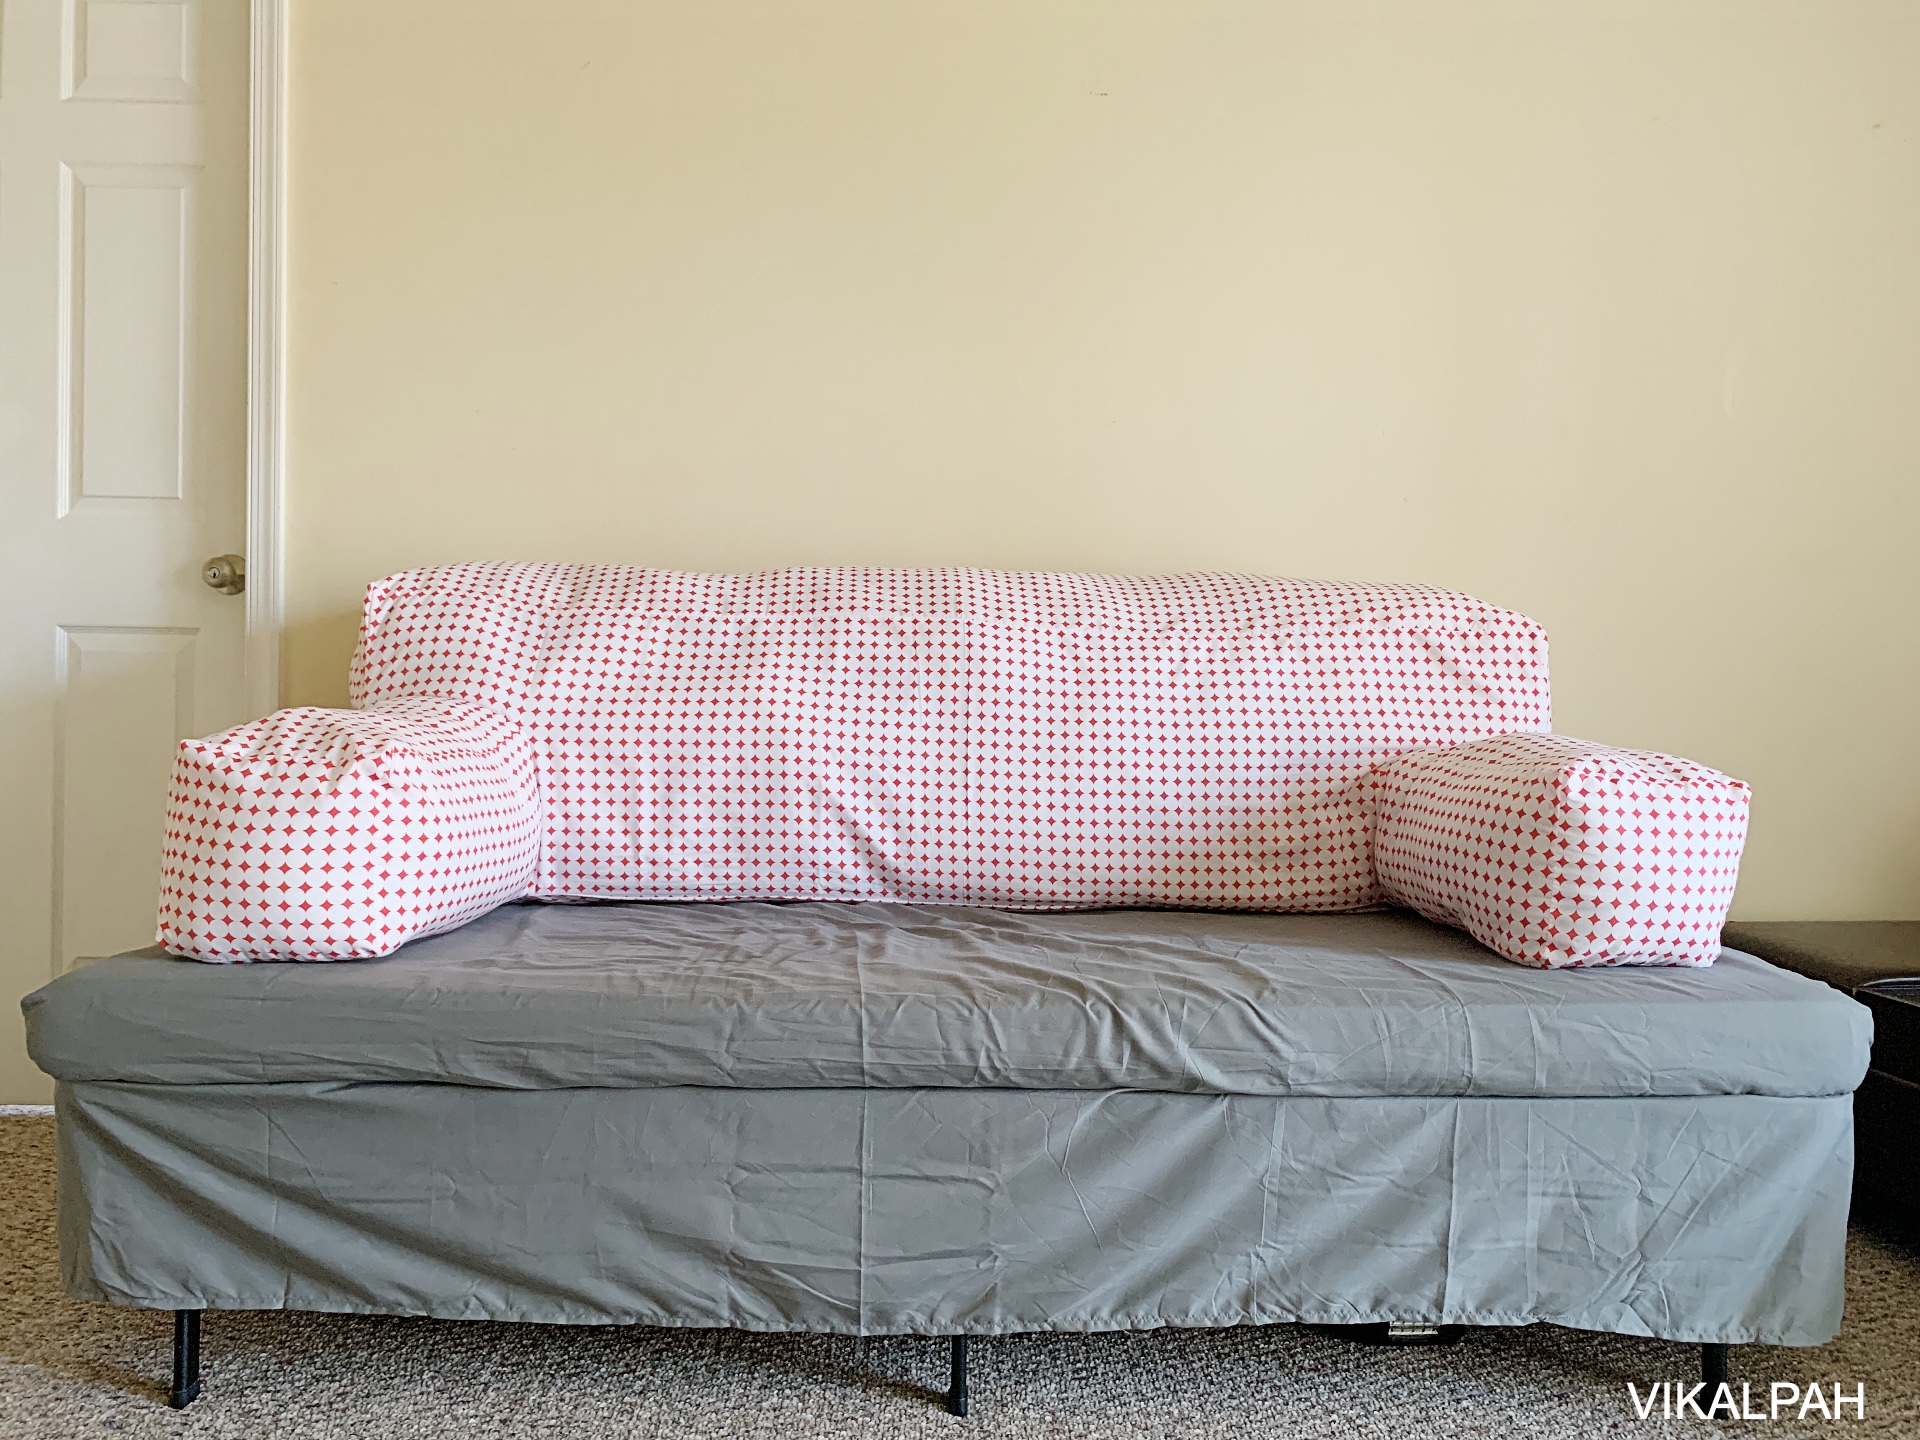 How To Convert A Twin Bed Into Couch, How To Make A Couch Out Of 2 Twin Beds